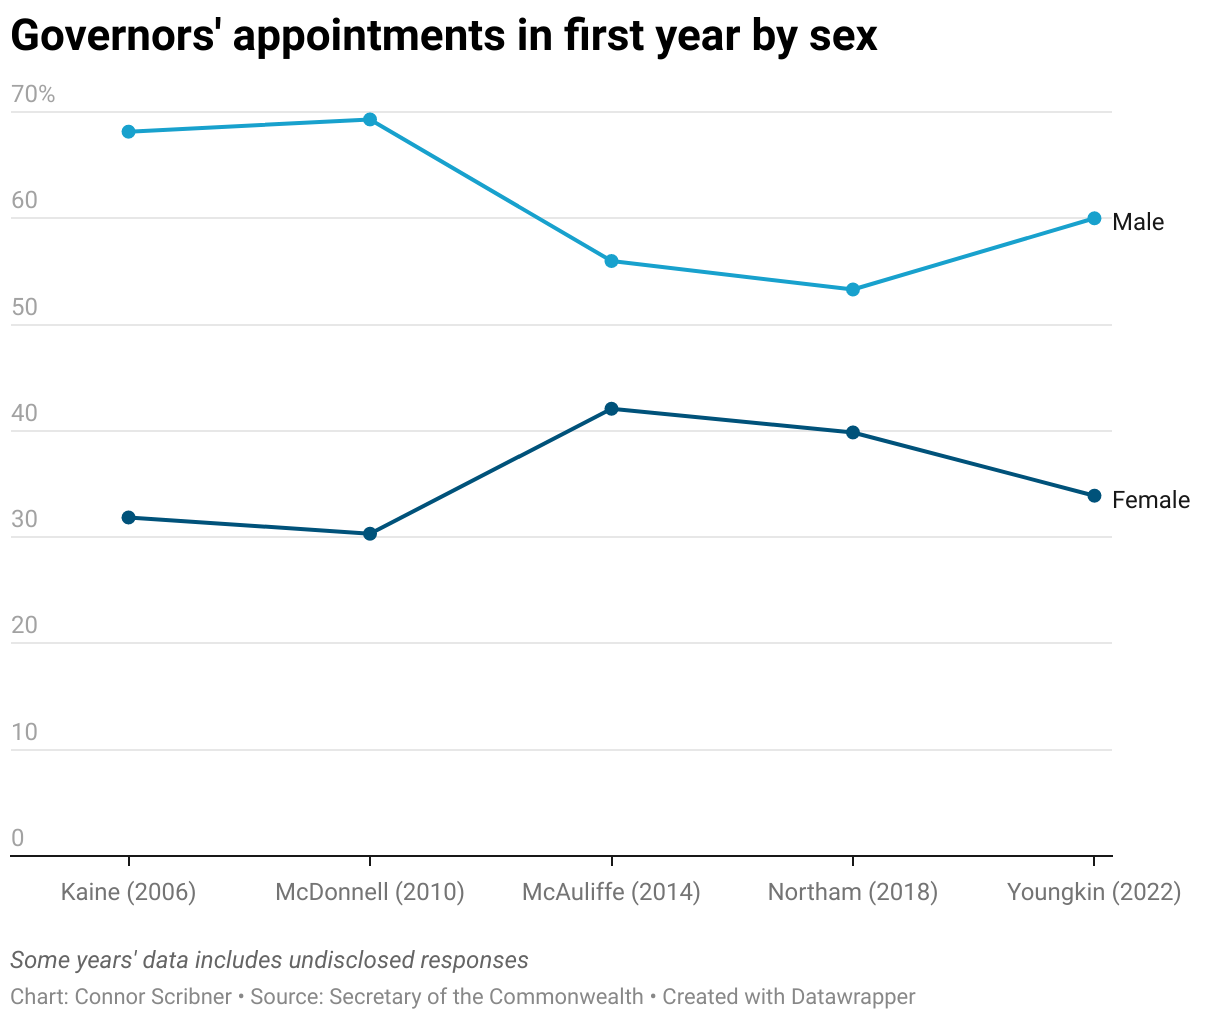 A line chart showing the percentage of males and females appointed by the five most recent governors during their first years in office. Gov. Kim Kaine (2006): 68.15% male, 31.85% female; Gov. Bob McDonnell (2010): 69.3% male, 30.32% female; Gov. Terry McAuliffe (2014): 55.98%, 42.08%; Gov. Ralph Northam (2018): 53.3% male, 39.85% female; Gov. Glenn Youngkin (2022): 60% male; 33.9% female